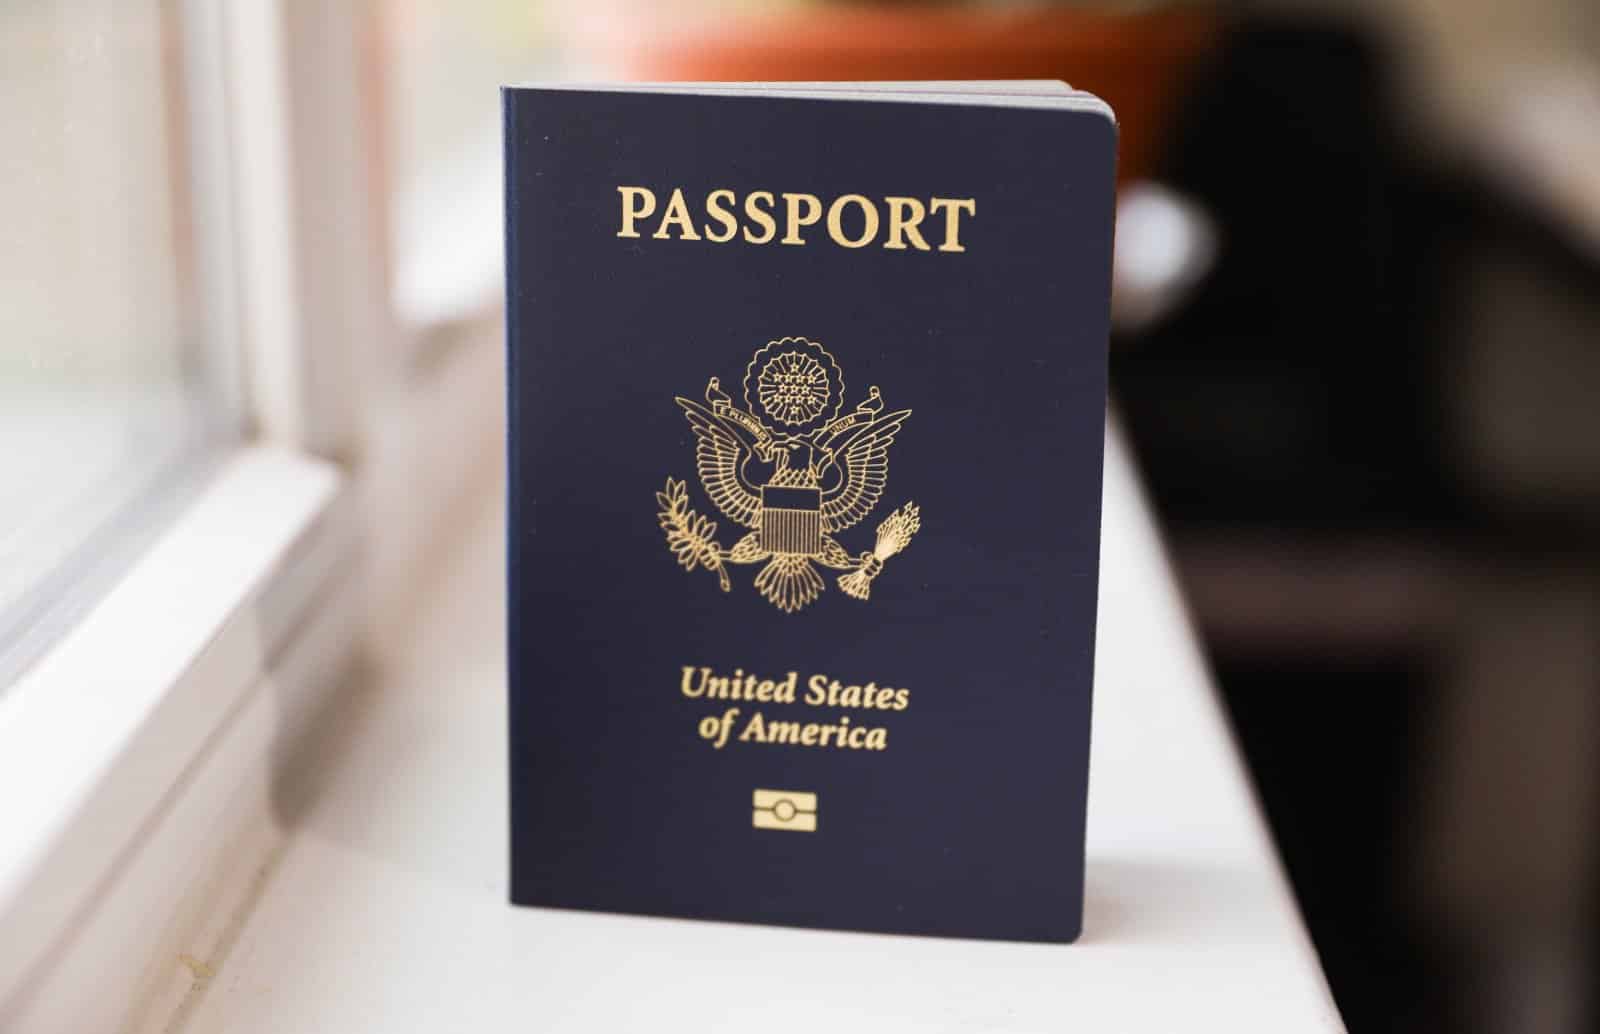 <p><span>The overlooked detail of passport expiration can derail your travel plans. Regularly check your passport’s expiry date and renew it well in advance if necessary. Countries requiring a certain number of blank pages in your passport do so for immigration stamps. Falling short on this requirement can result in denied boarding or entry.</span></p> <p><span>Keep in mind that renewal times can vary, and expedited services, while available, come with additional costs. This is a critical step in your travel preparation, so make it a priority in your planning stages.</span></p> <p><b>Insider’s Tip: </b><span>Ensure your passport has sufficient validity — many countries require it to be valid for at least six months beyond your travel date. Also, check for blank pages; some countries require a specific number for entry and exit stamps.</span></p>